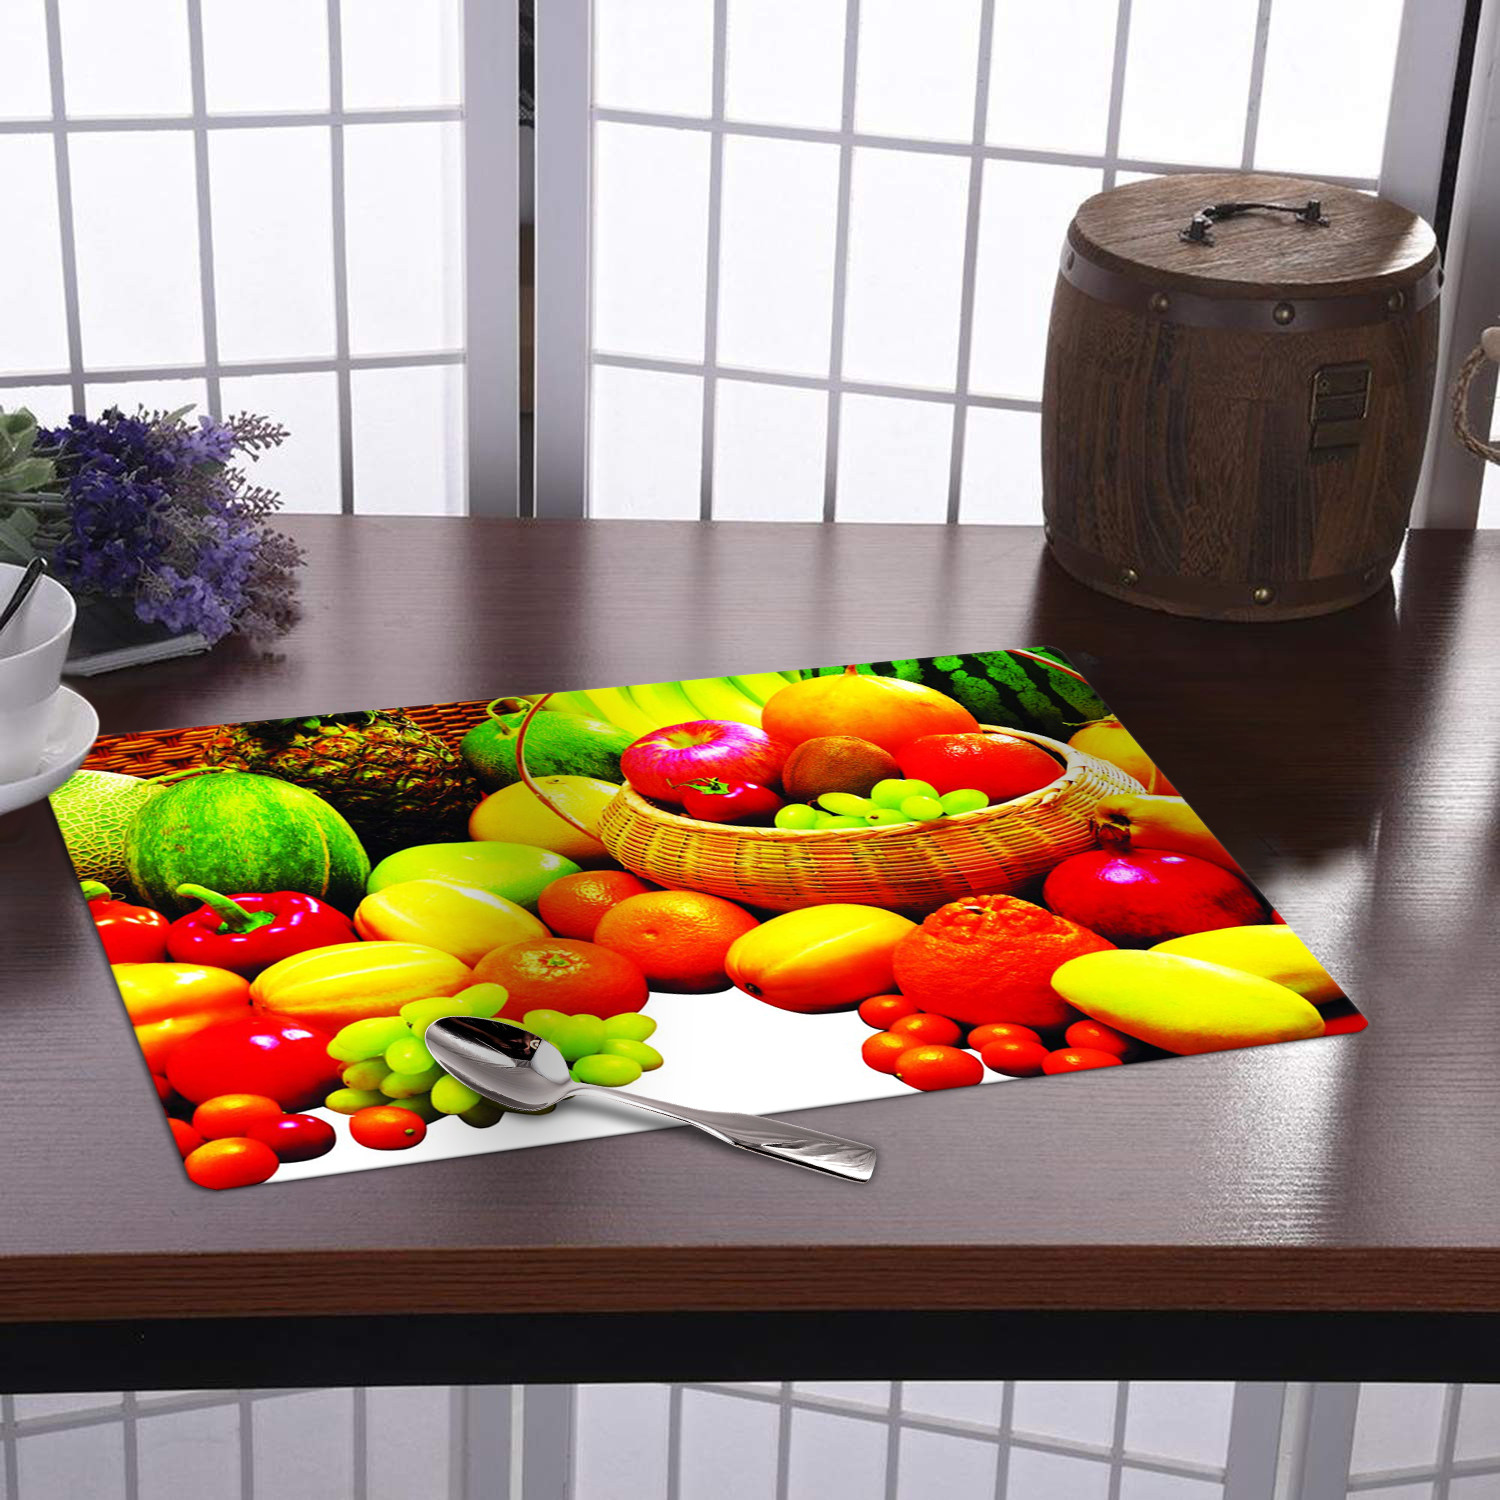 Kuber Industries Multiuses Fruit Print PVC Table Placemat for kitchen, Dining Table Set of 6 (Multicolour)